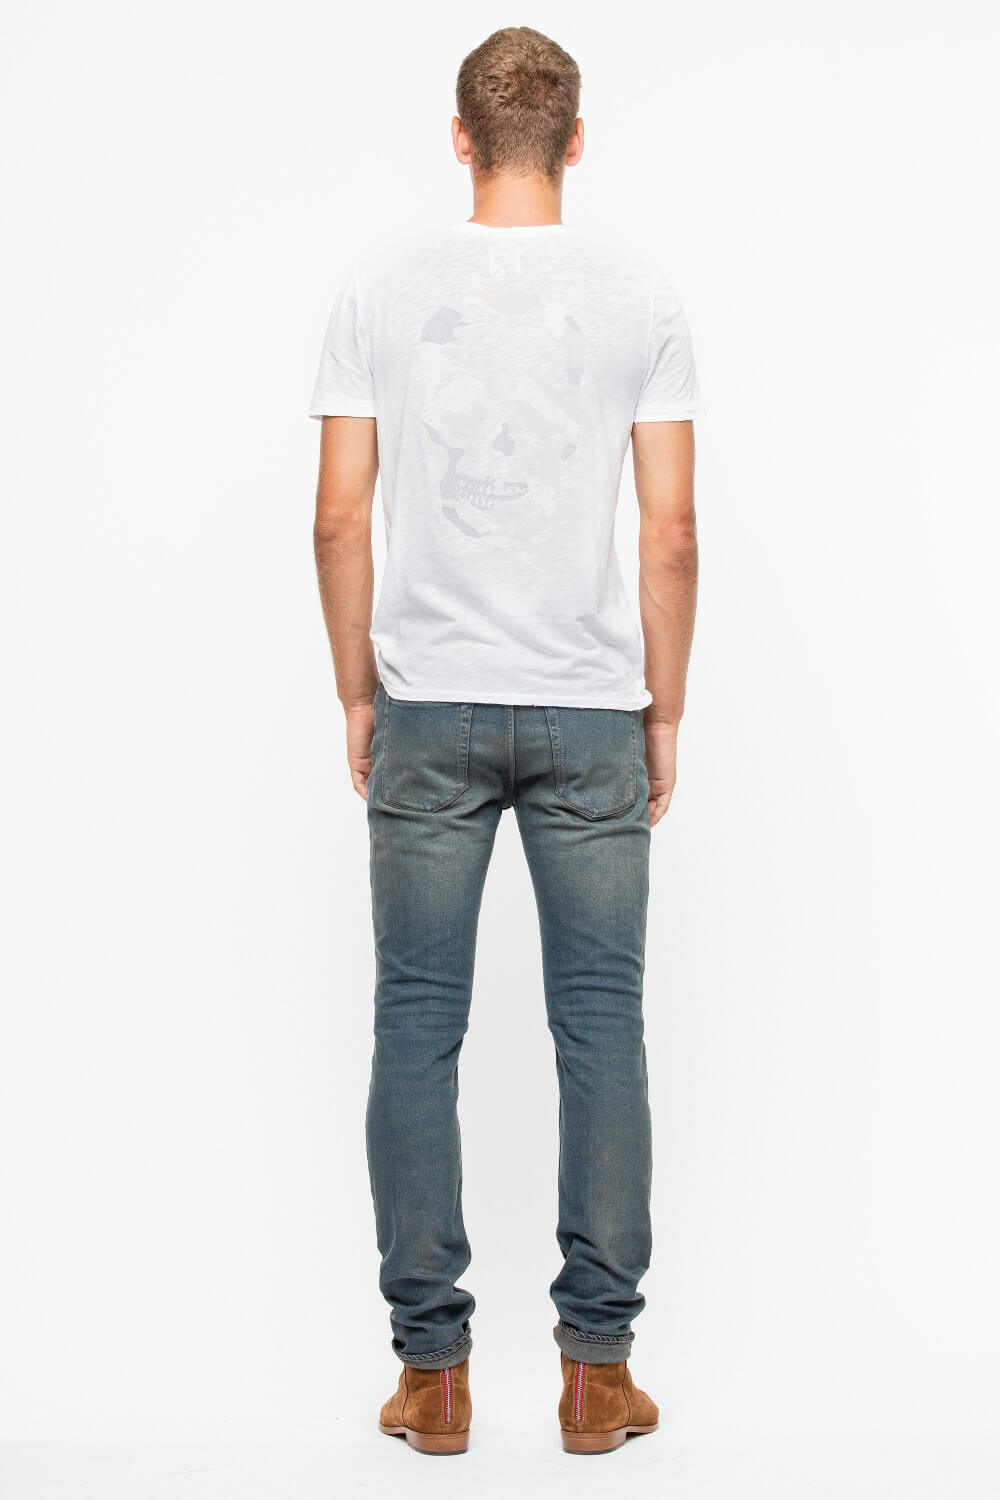 ZADIG&VOLTAIRE T-SHIRT-Libas Trendy Fashion Store